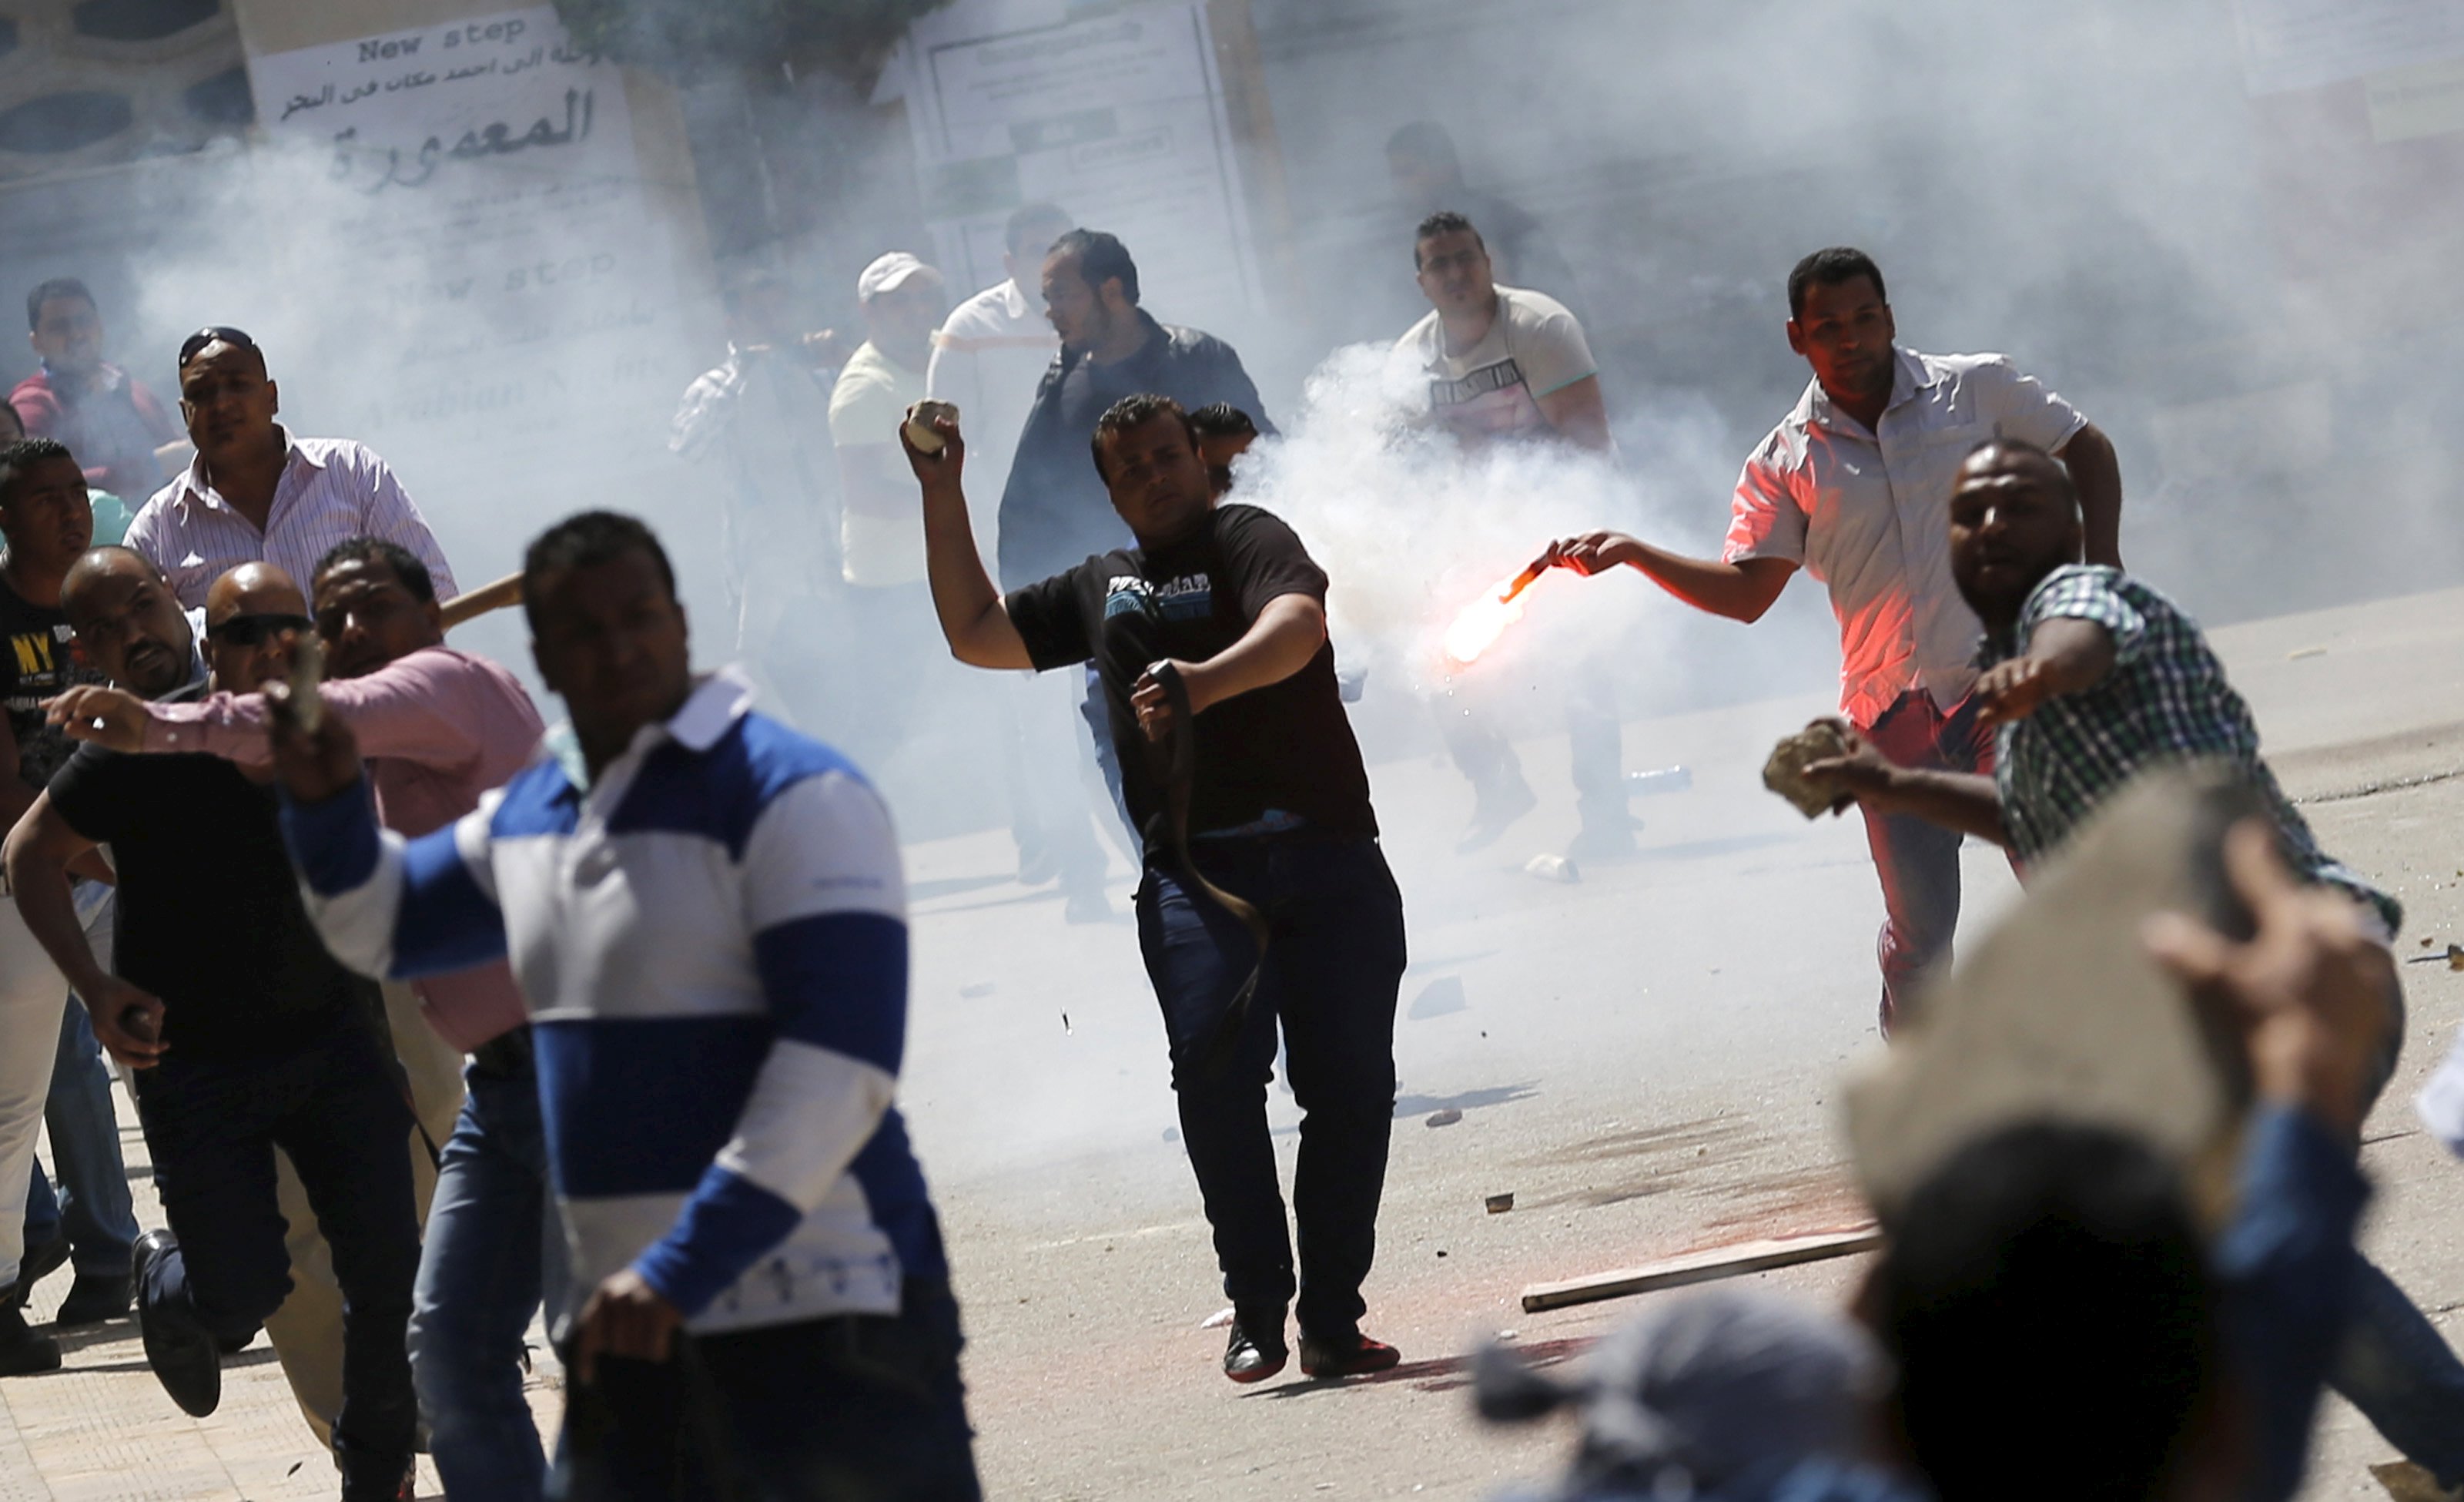 Administrative security personnel (back) clash with Cairo University students who are supporters of the Muslim Brotherhood and ousted President Mohamed Mursi during a protest against the military and interior ministry at the university's campus in Giza, on the outskirts of Cairo, April 19, 2015. The protest was organized by students and members of the Muslim Brotherhood in Cairo University ahead of final exams and Tuesday’s verdict for ousted president Mursi, according to members of the Muslim Brotherhood. REUTERS/Amr Abdallah Dalsh